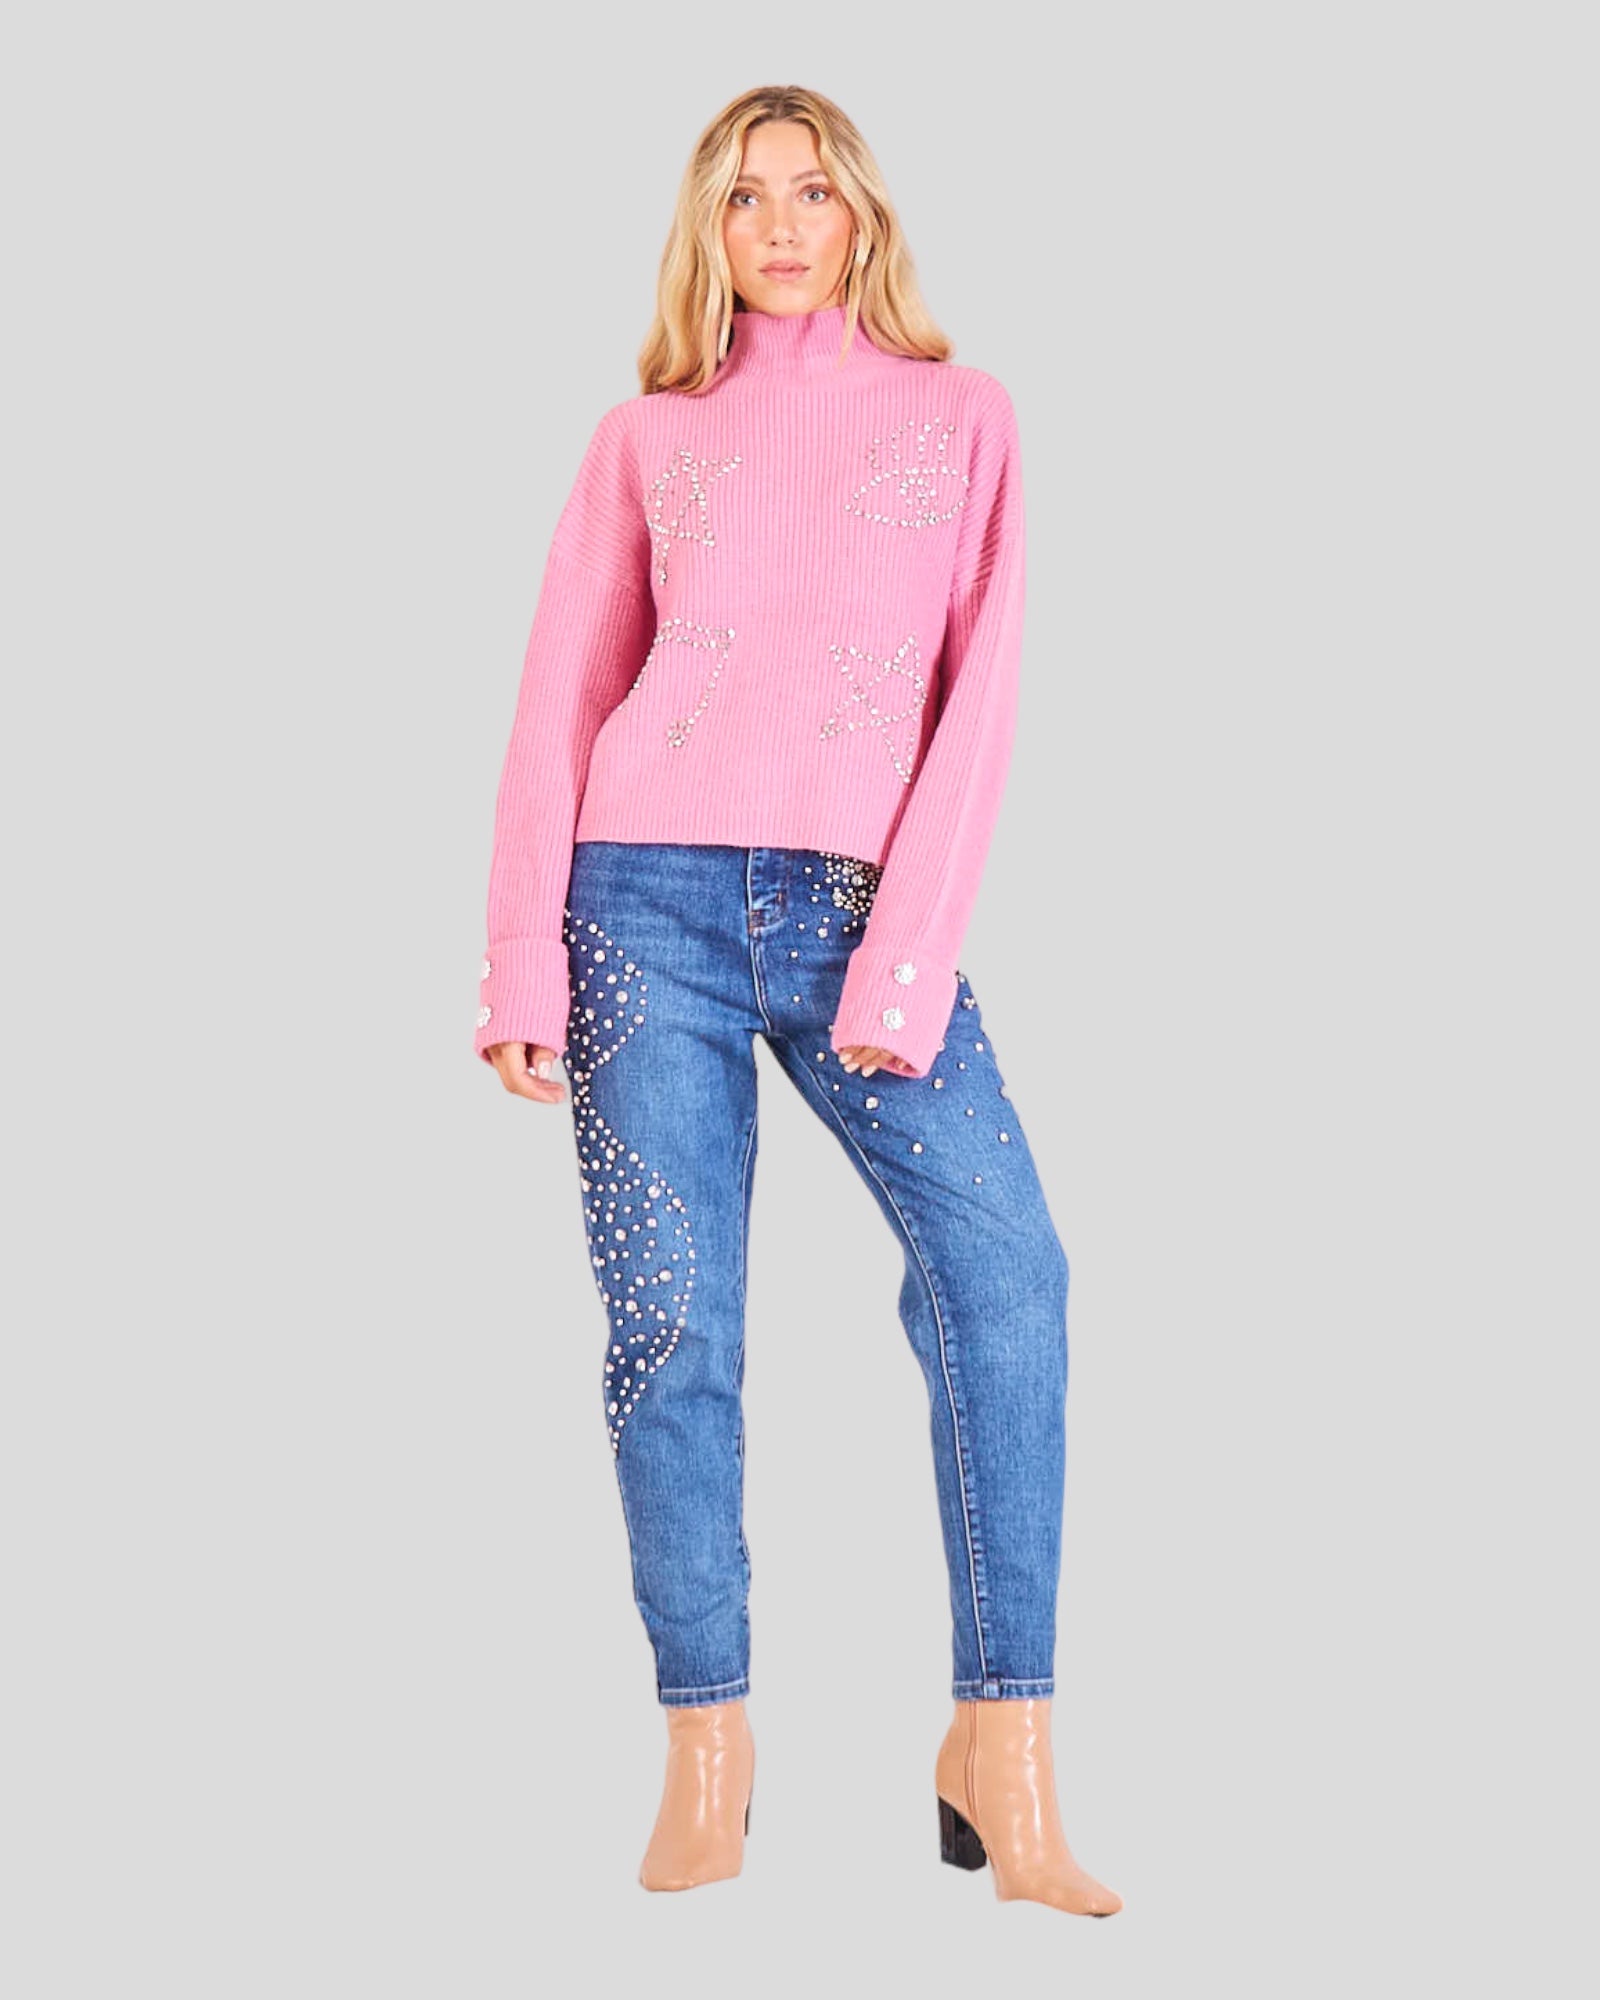 Sweater with a High Neck, Turn-Up Cuffs, and a Comfortable Straight Fit. The sweater is adorned with sparkling rhinestone applications on the front, and two large rhinestone buttons grace the turned cuffs, adding a touch of glamour. 